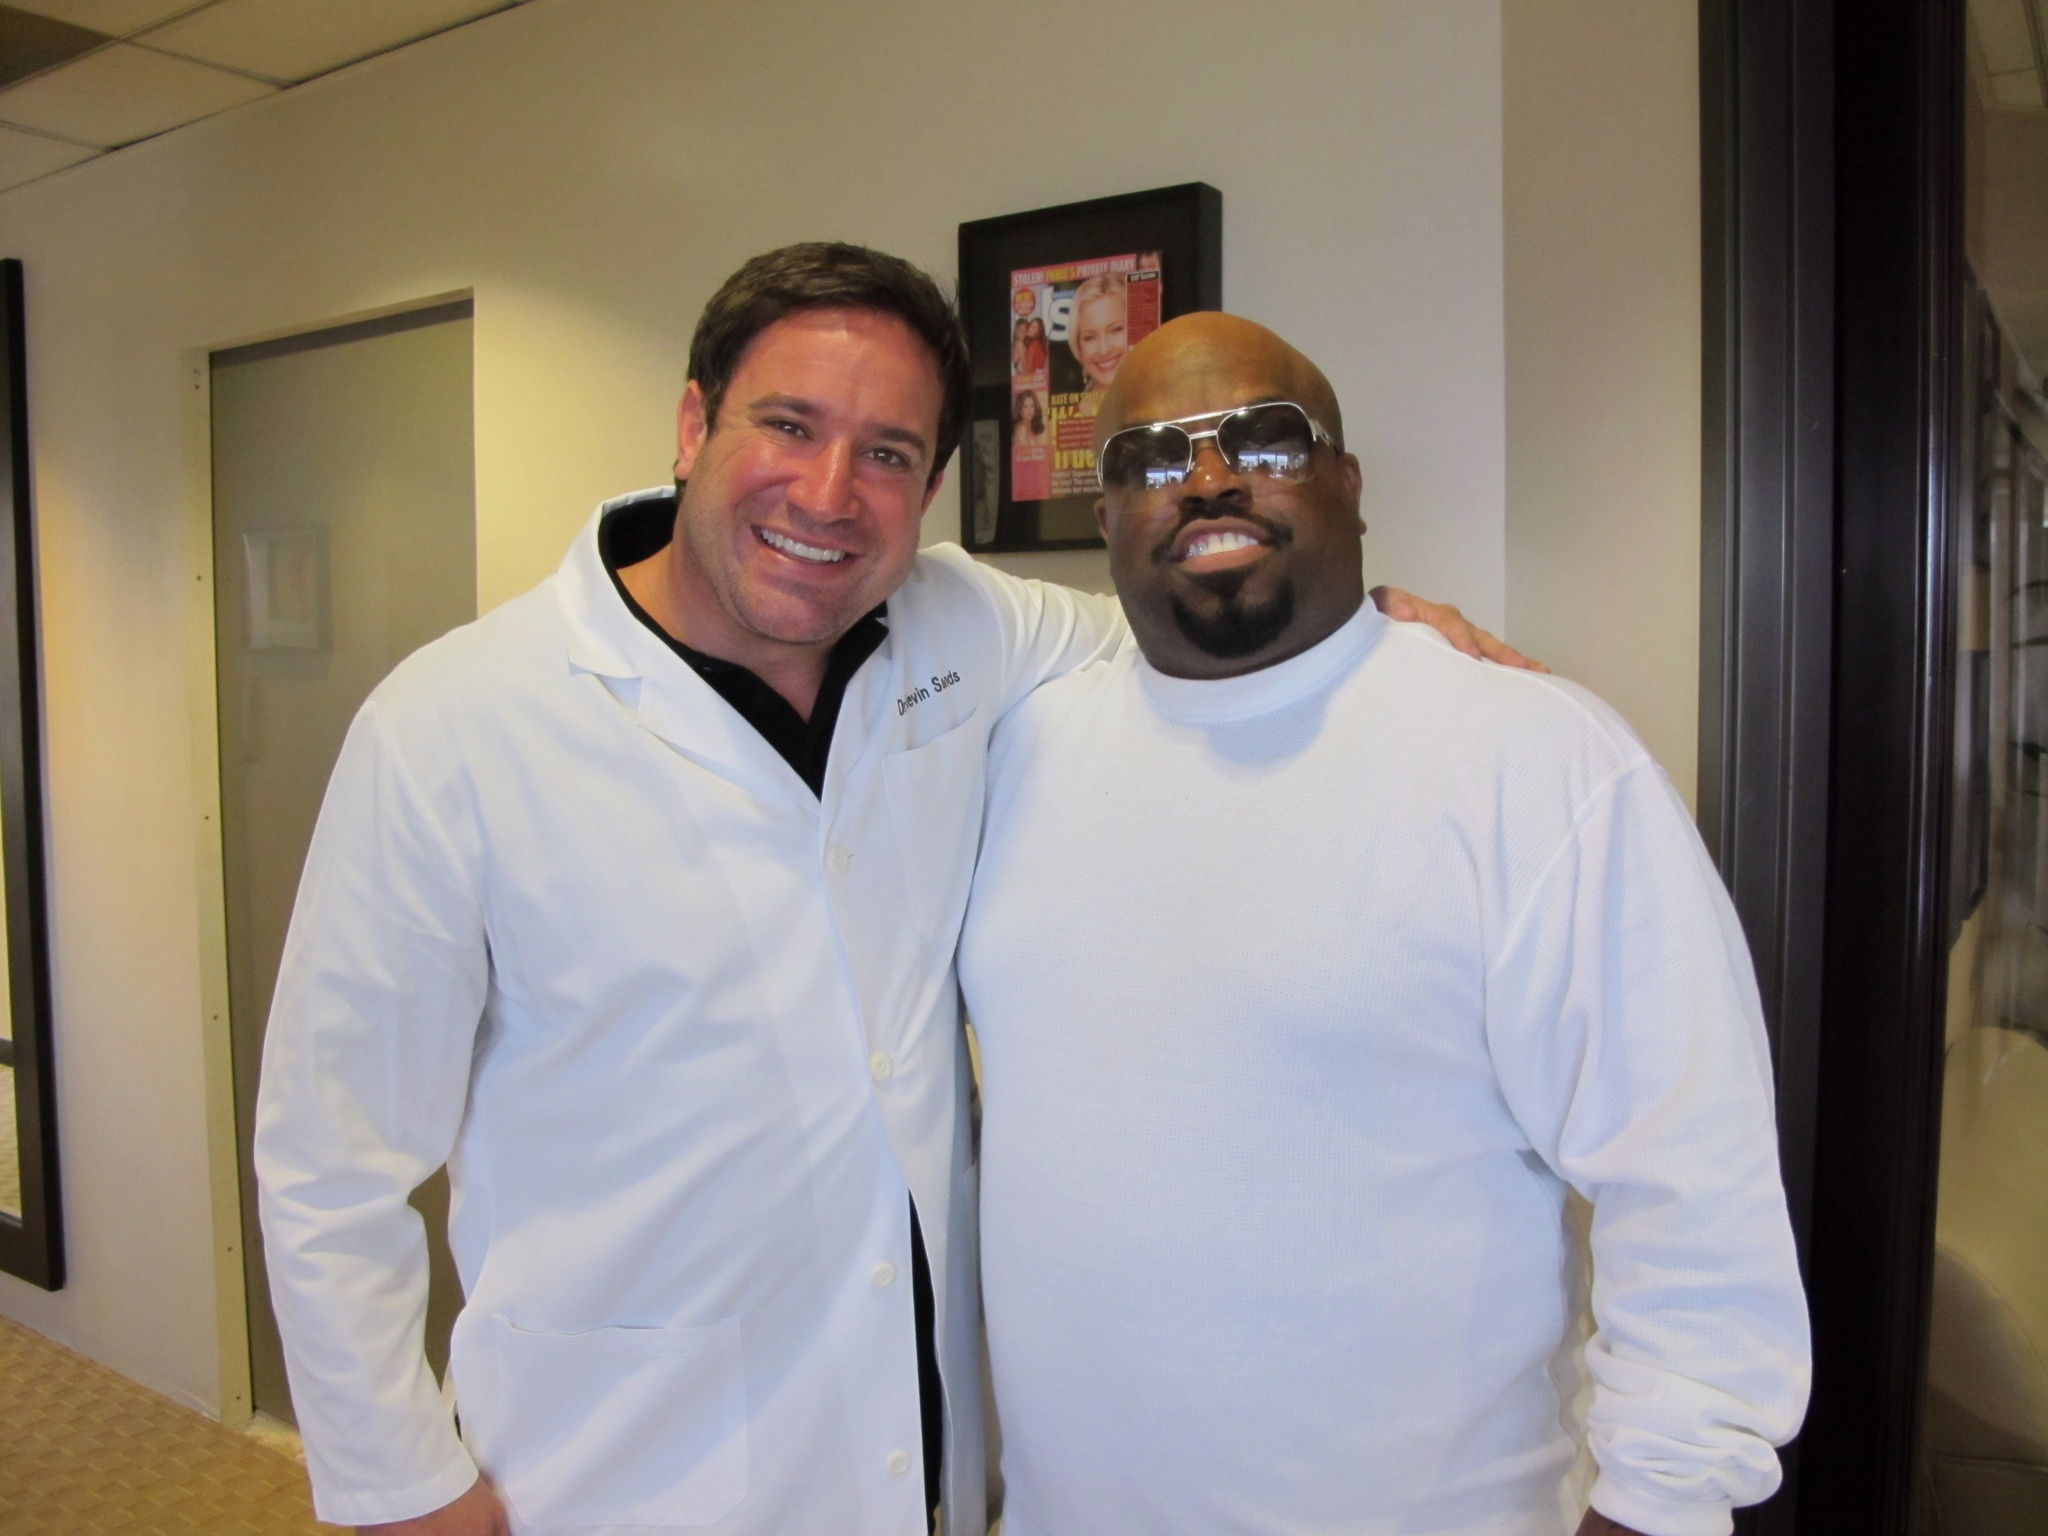 Dr. Kevin Sands with Cee Lo Green